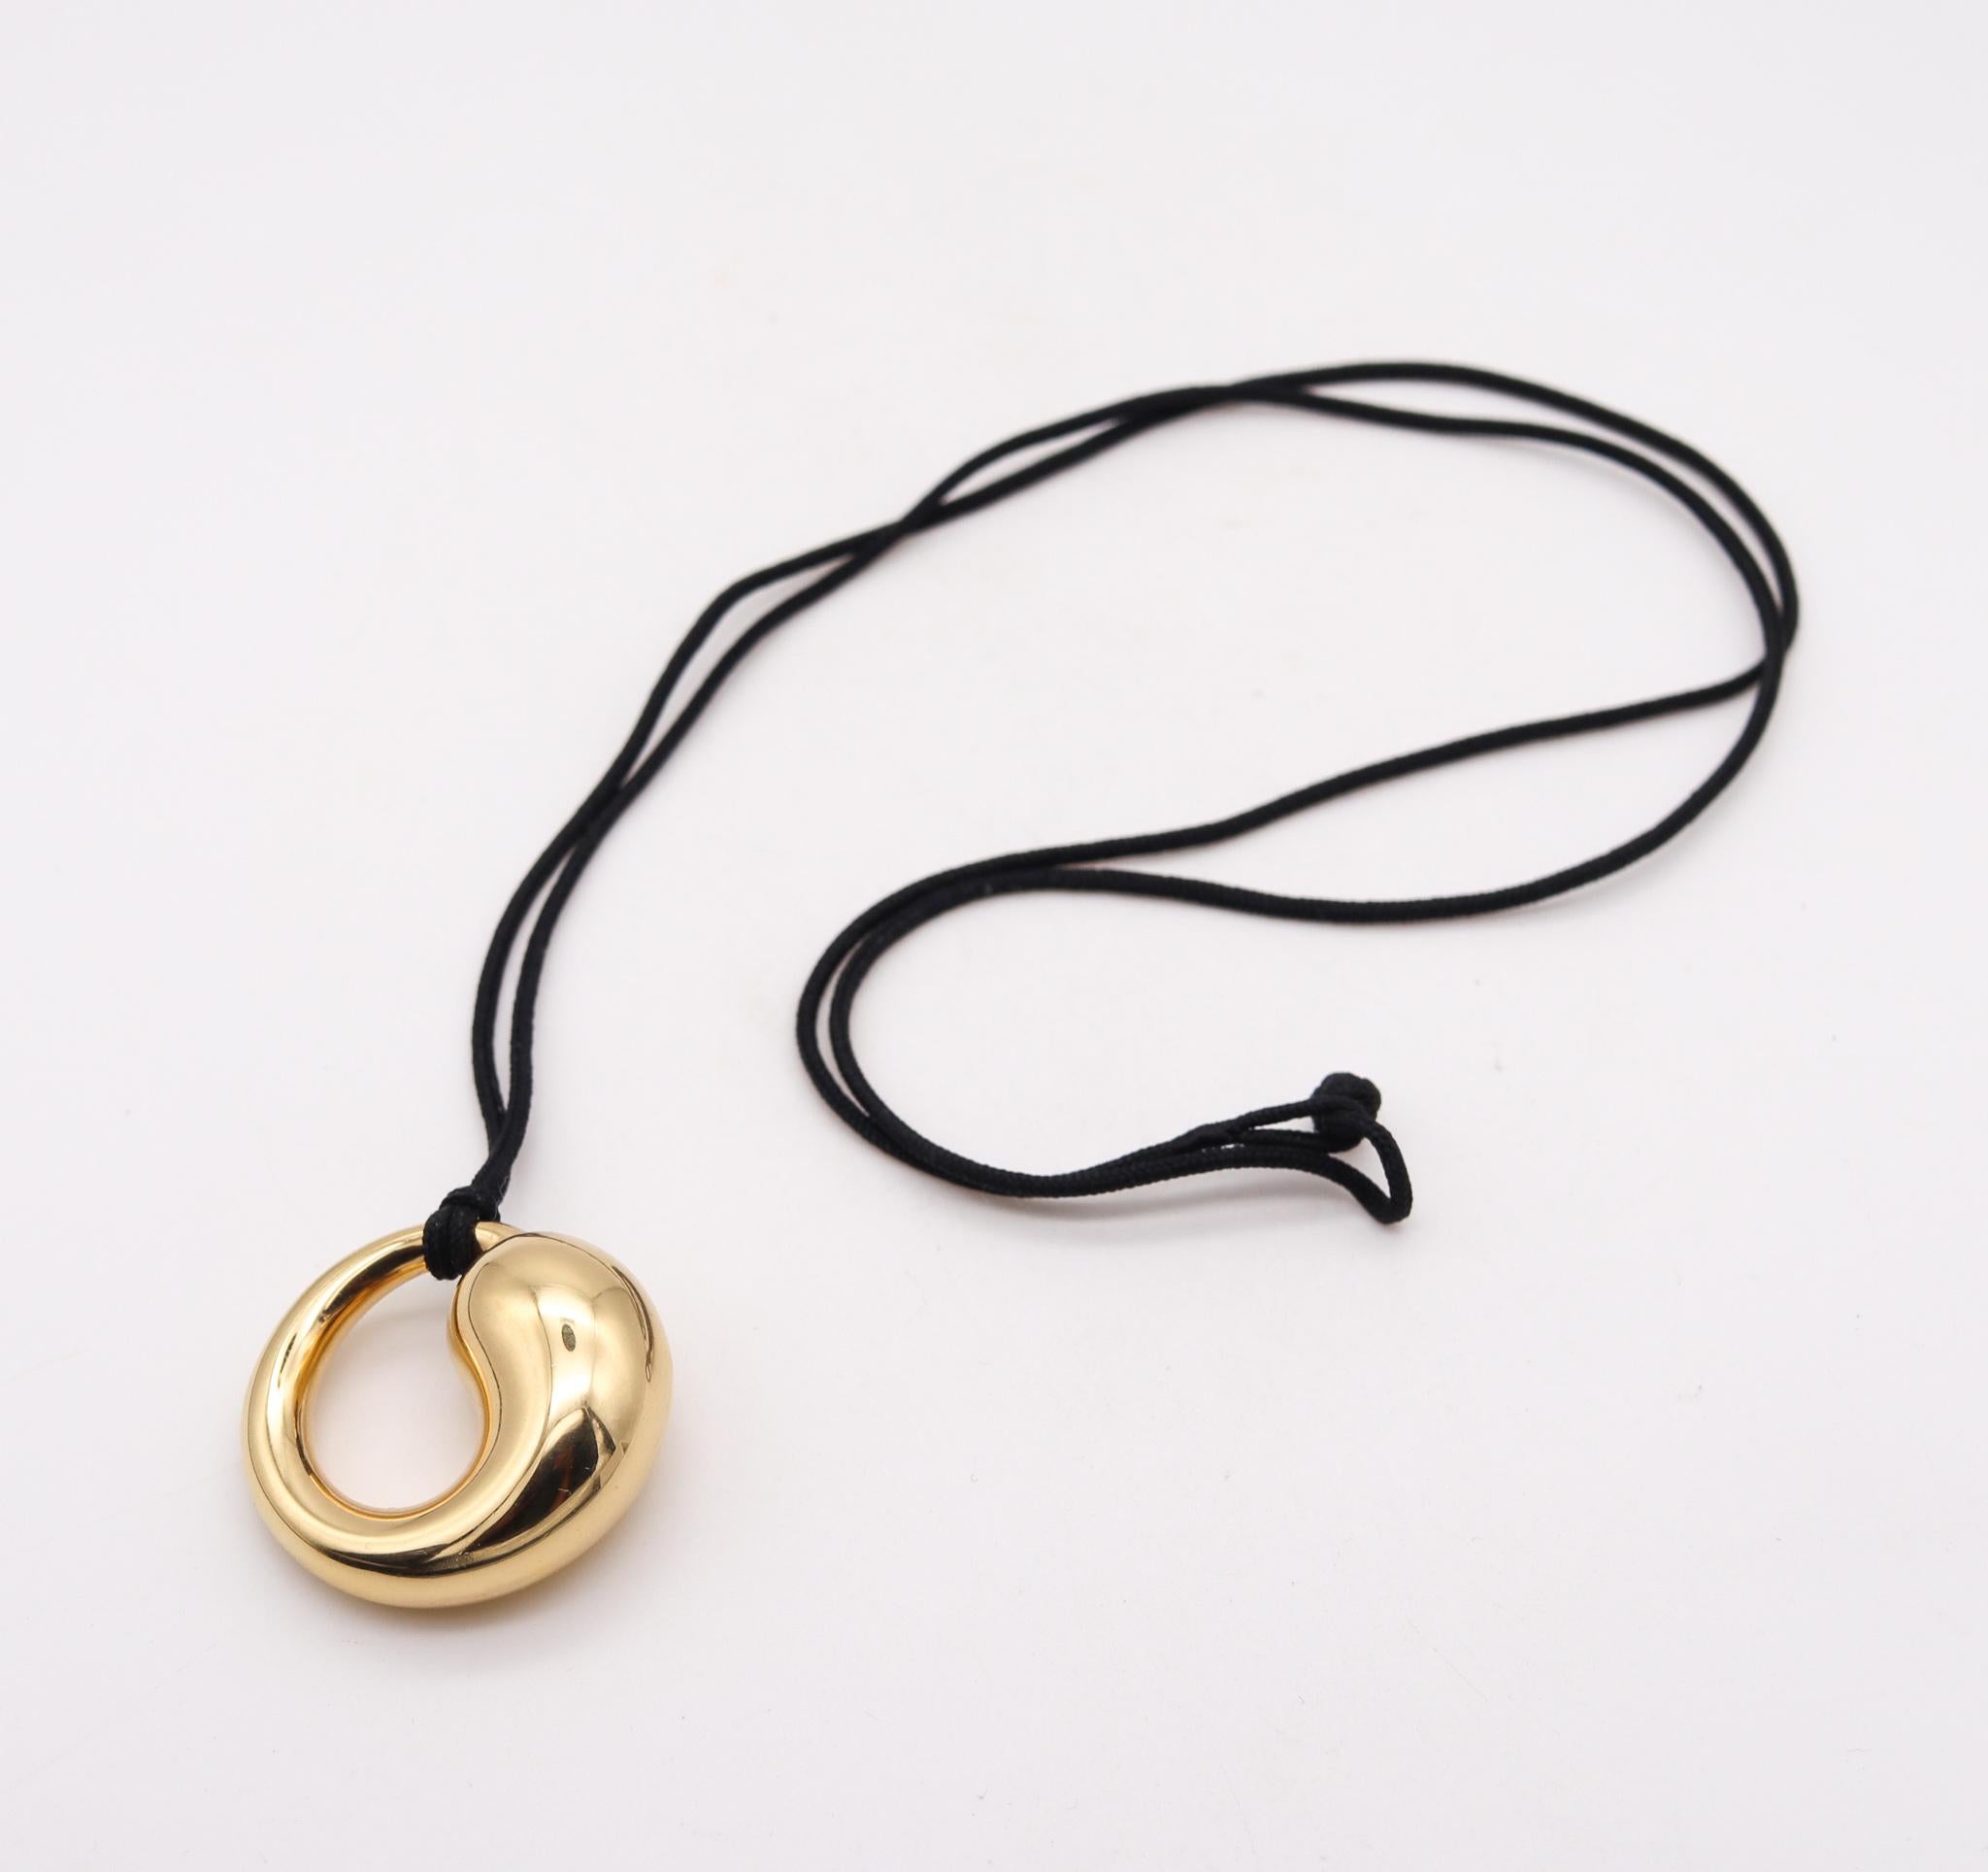 Eternal circle necklace designed by Elsa Peretti (1940-2019) for Tiffany & Co.

The iconic Eternal Circle is one of the most recognizable Peretti's designs of the late 1970's. This extra large pendant necklace has been crafted at the Tiffany Studios